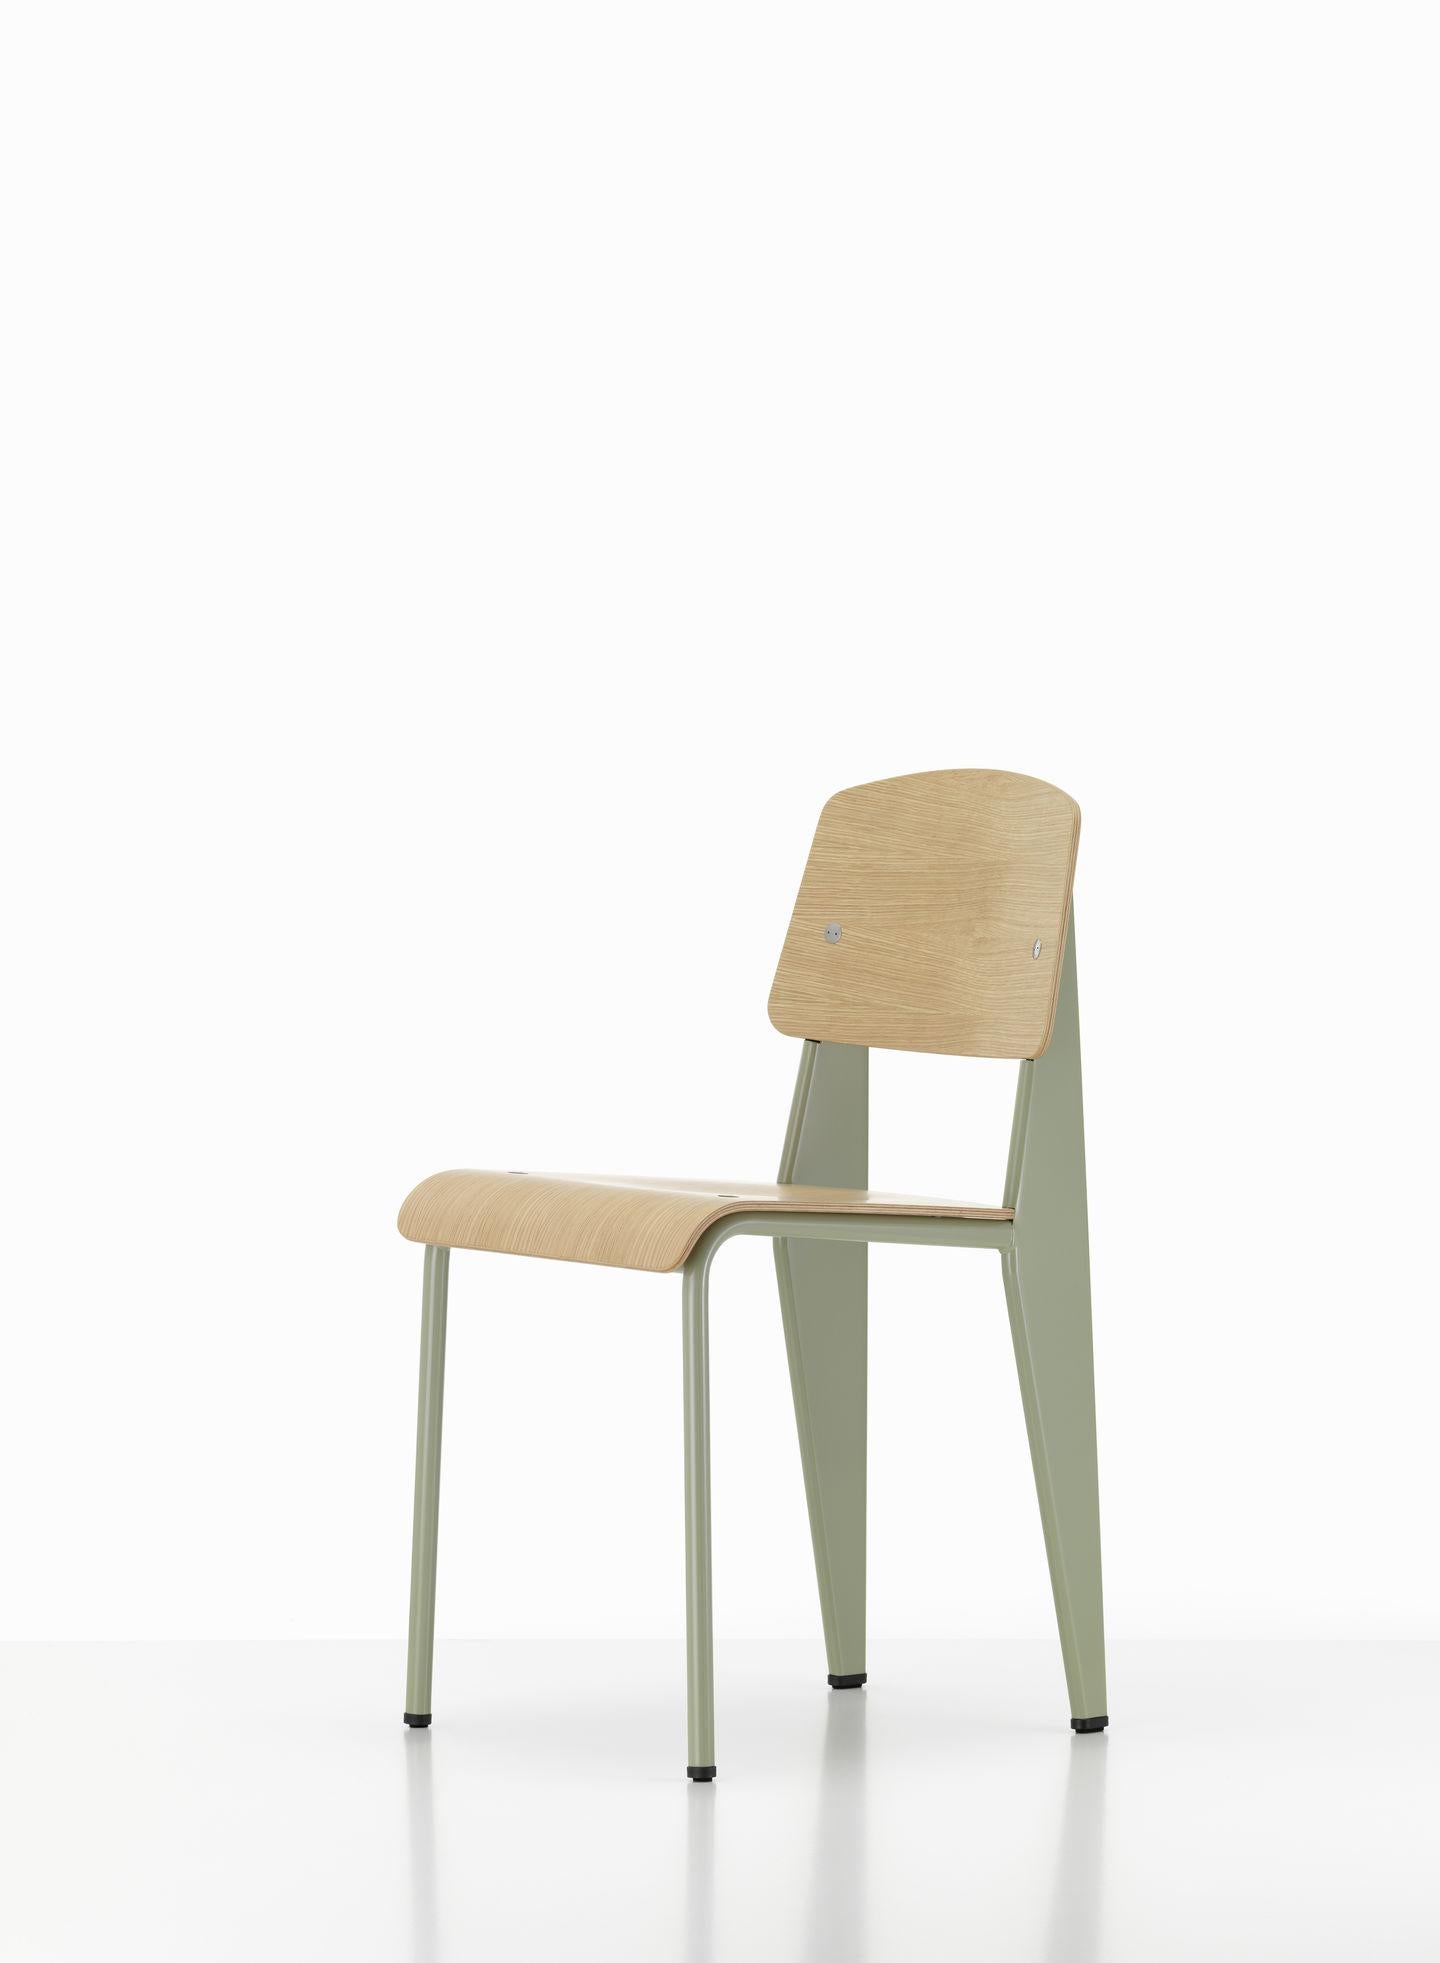 Jean Prouvé Standard Chair in Natural Oak and Blue Metal for Vitra For Sale 7